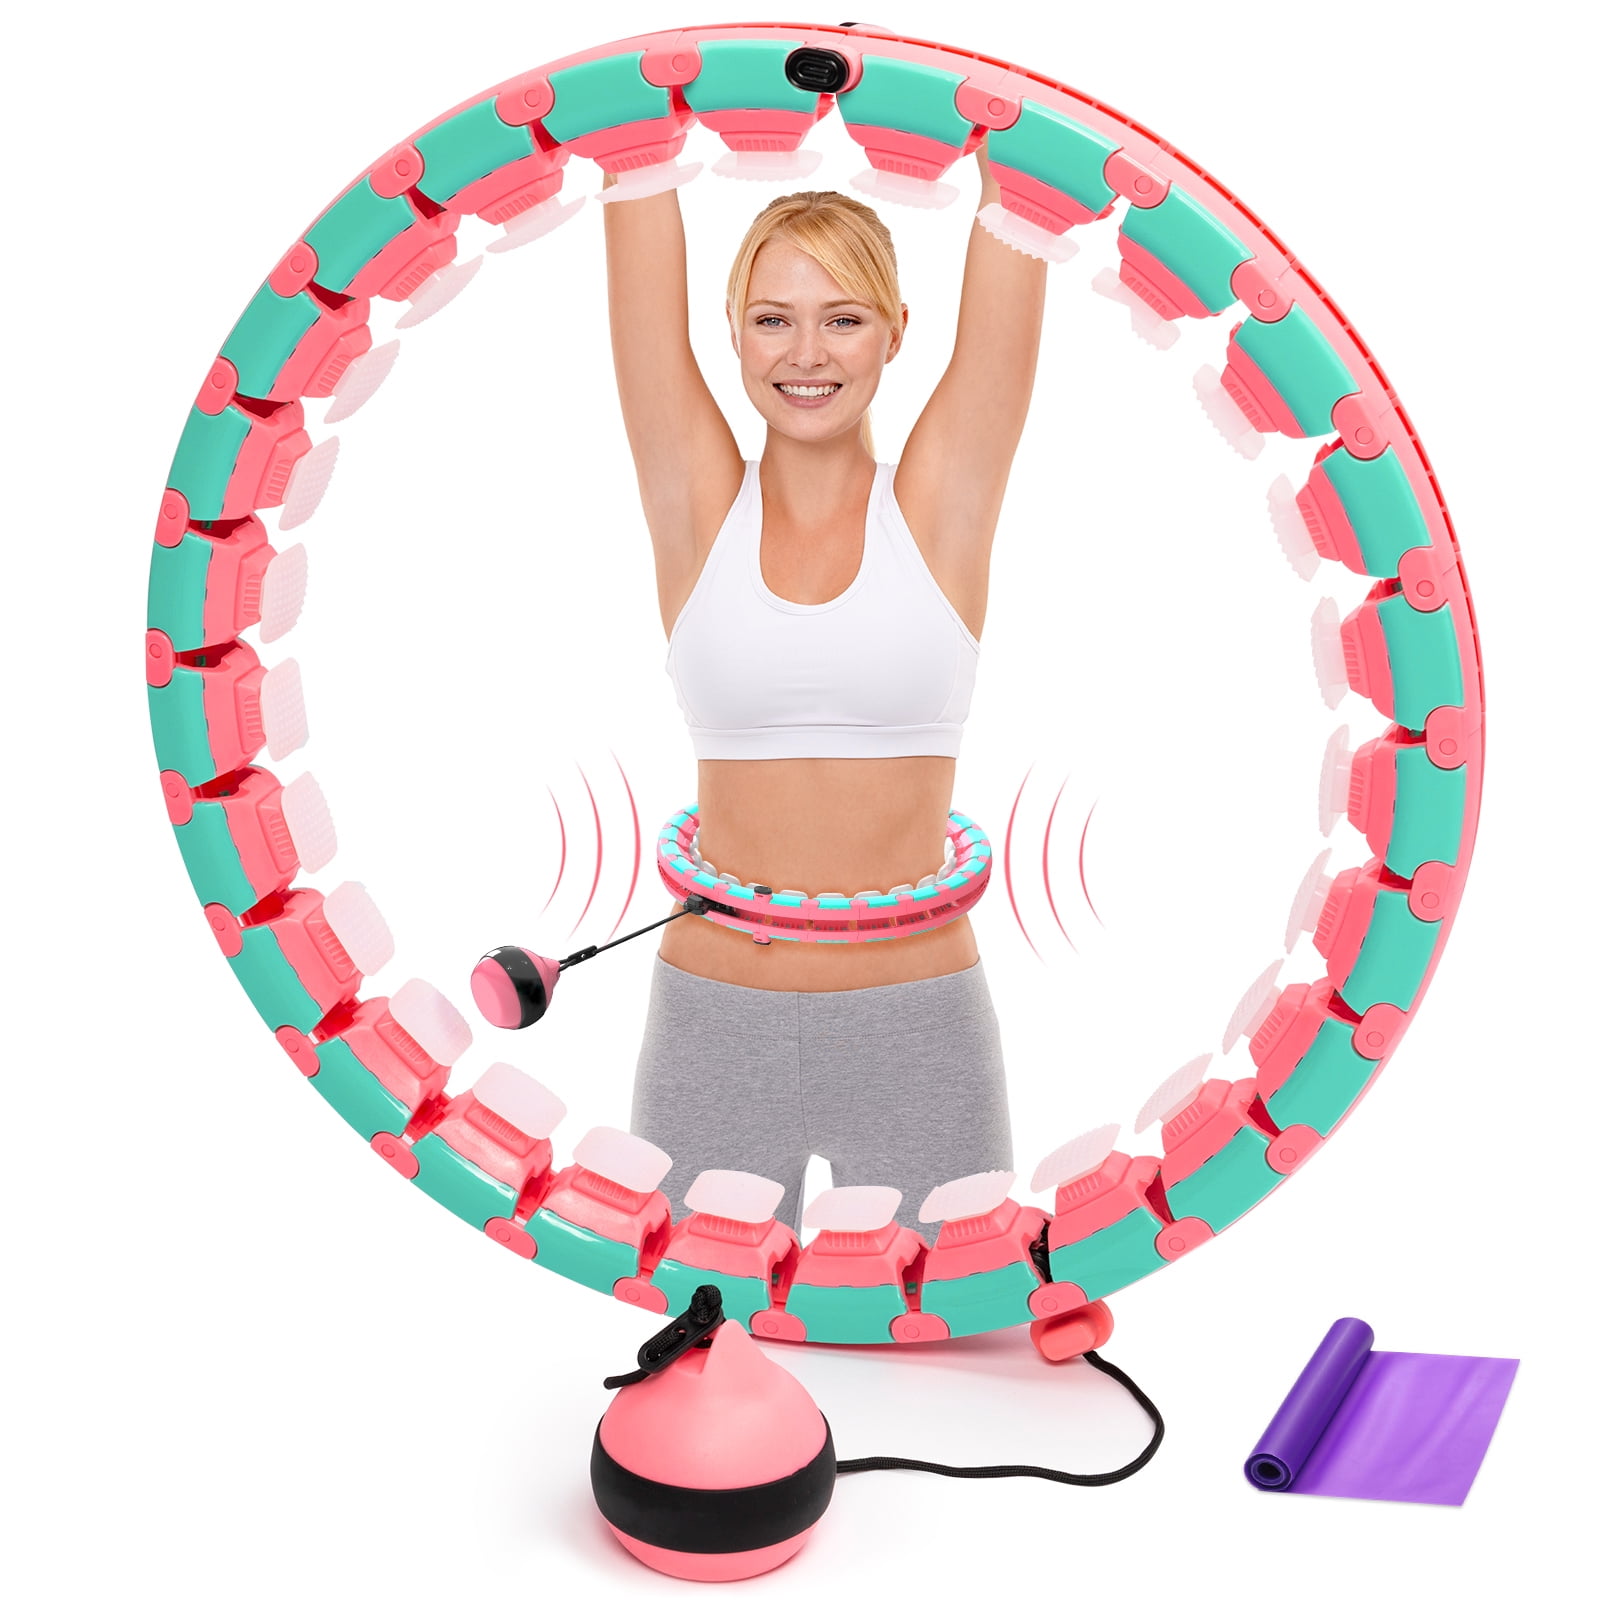 Dailing Hoola Hoops for Kids Chindrens Gymnastics Fitness Hoola Rings Size Adjustable 6 Sections Detachable Sports Toys Suitable for Fitness Gymnastics Swimming Boys Girls 250g D75cm 